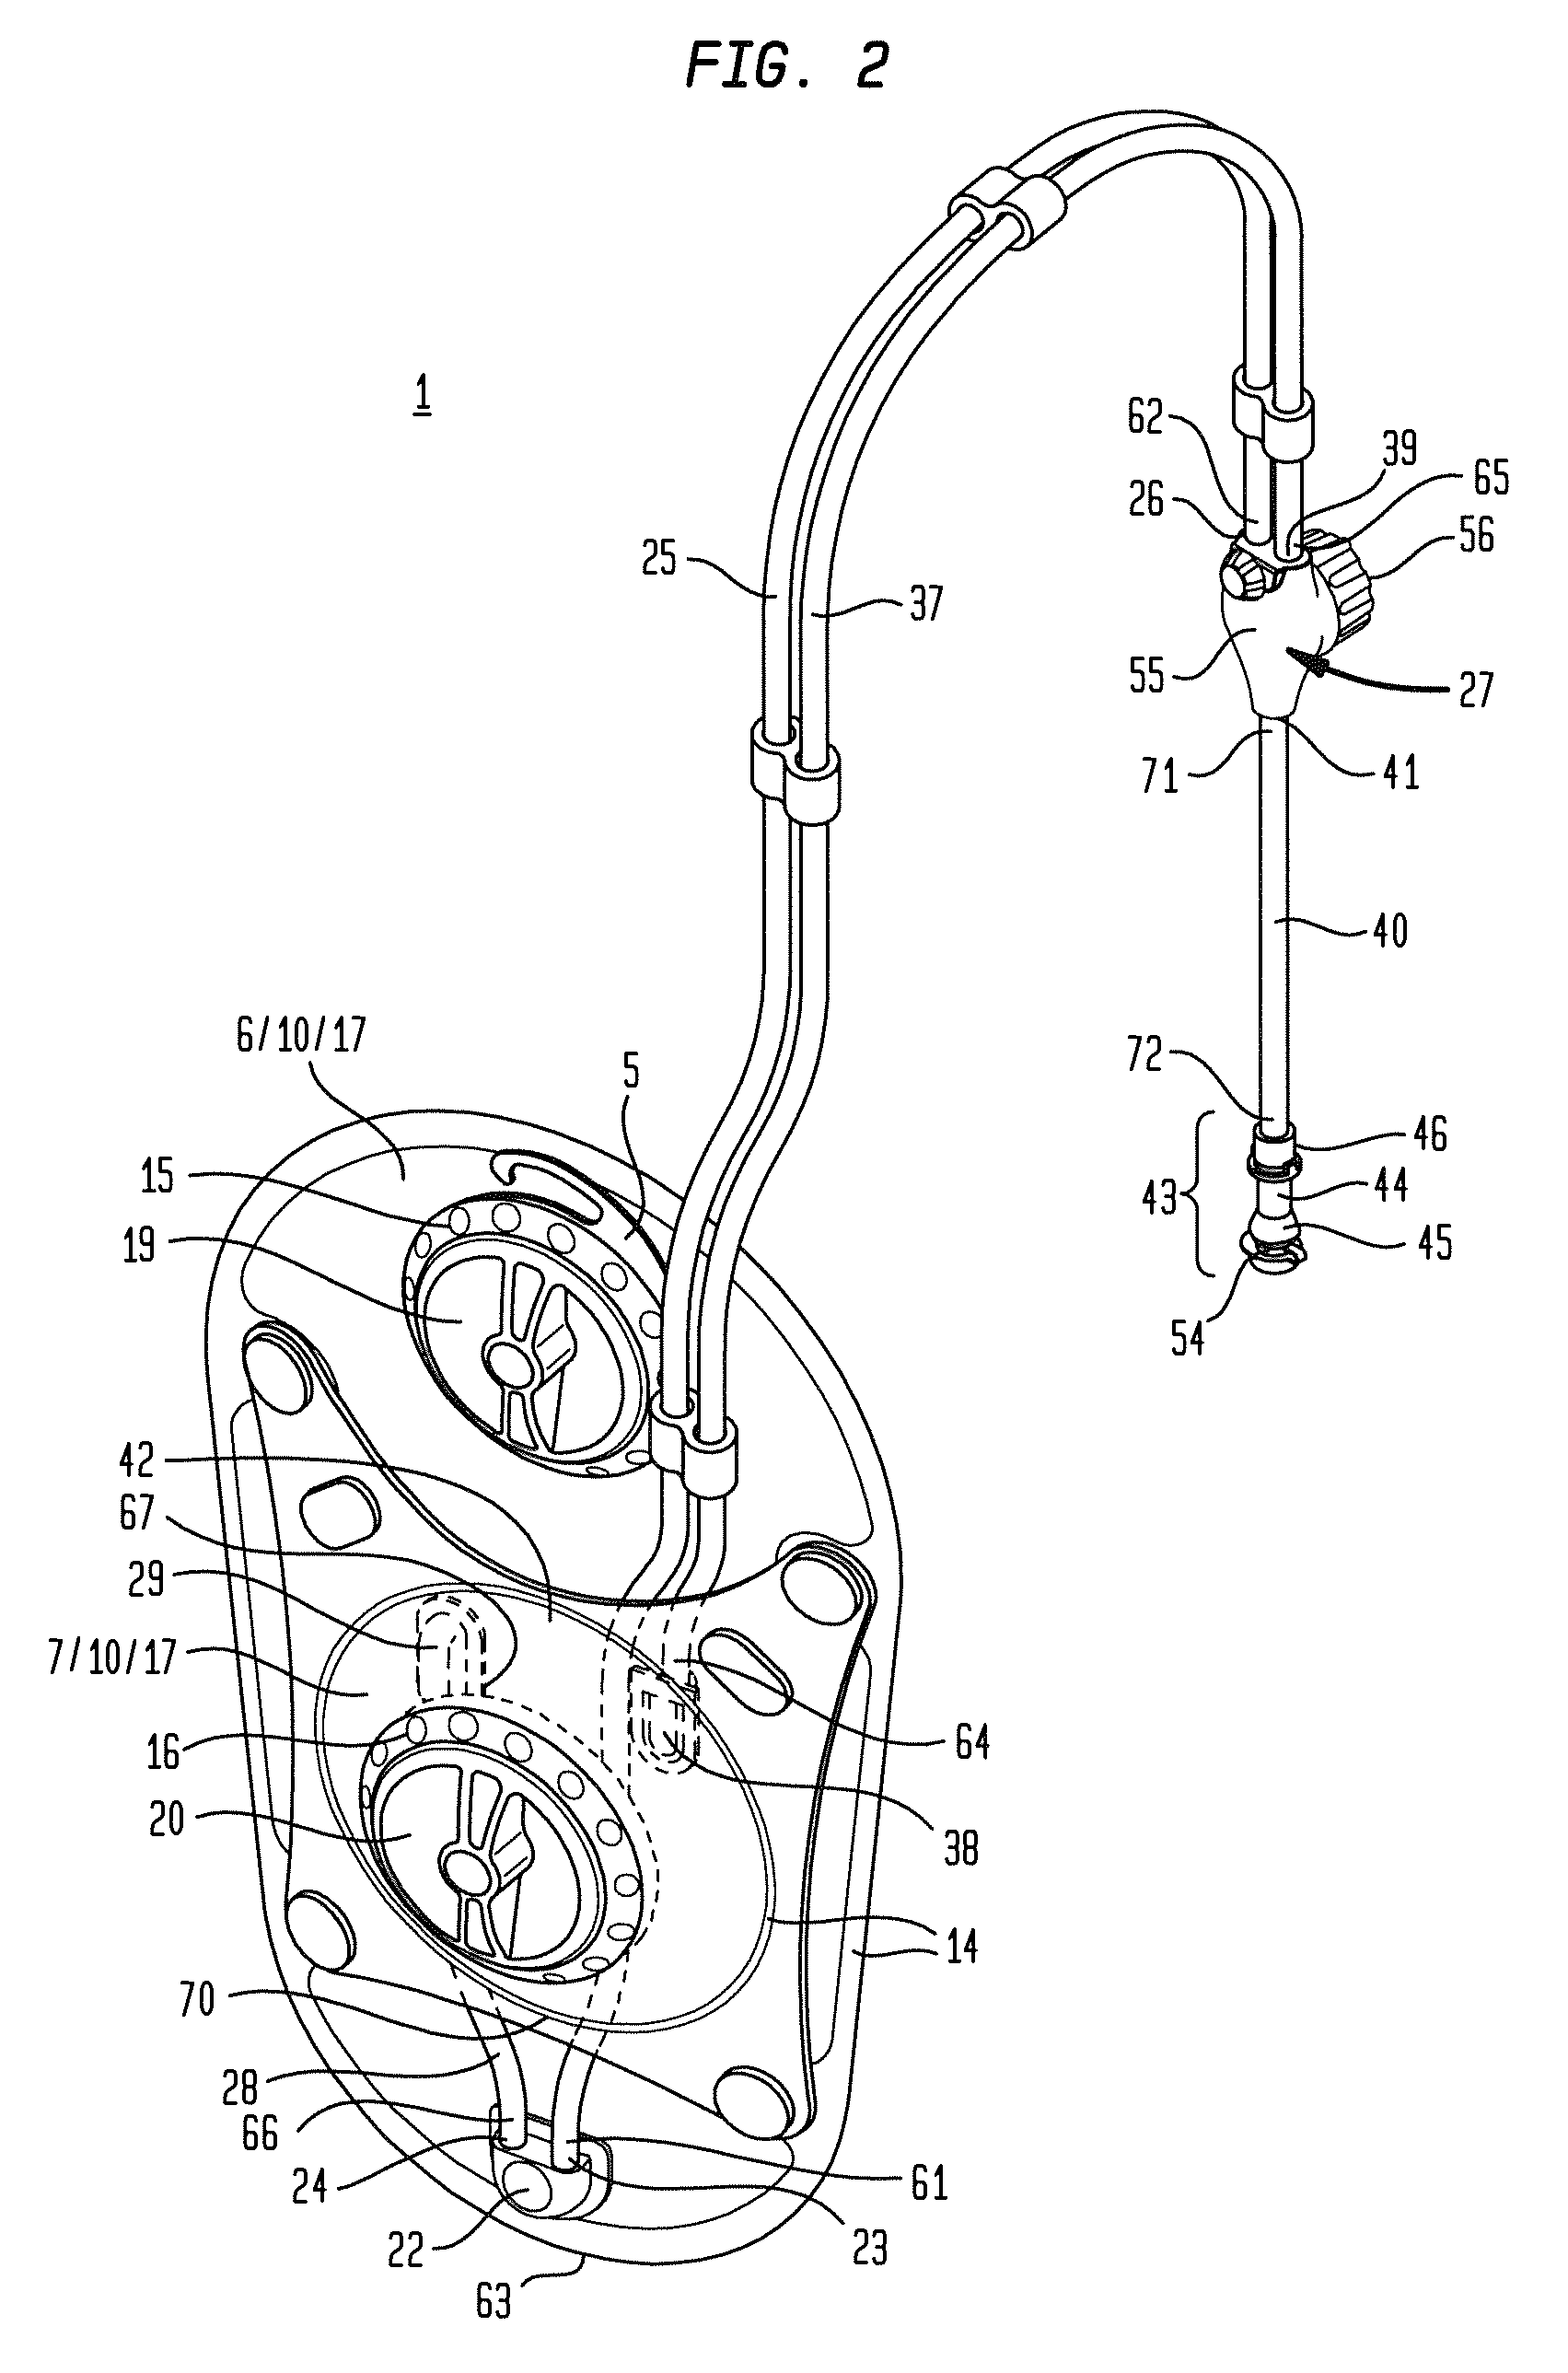 Two reservoir fluid delivery system